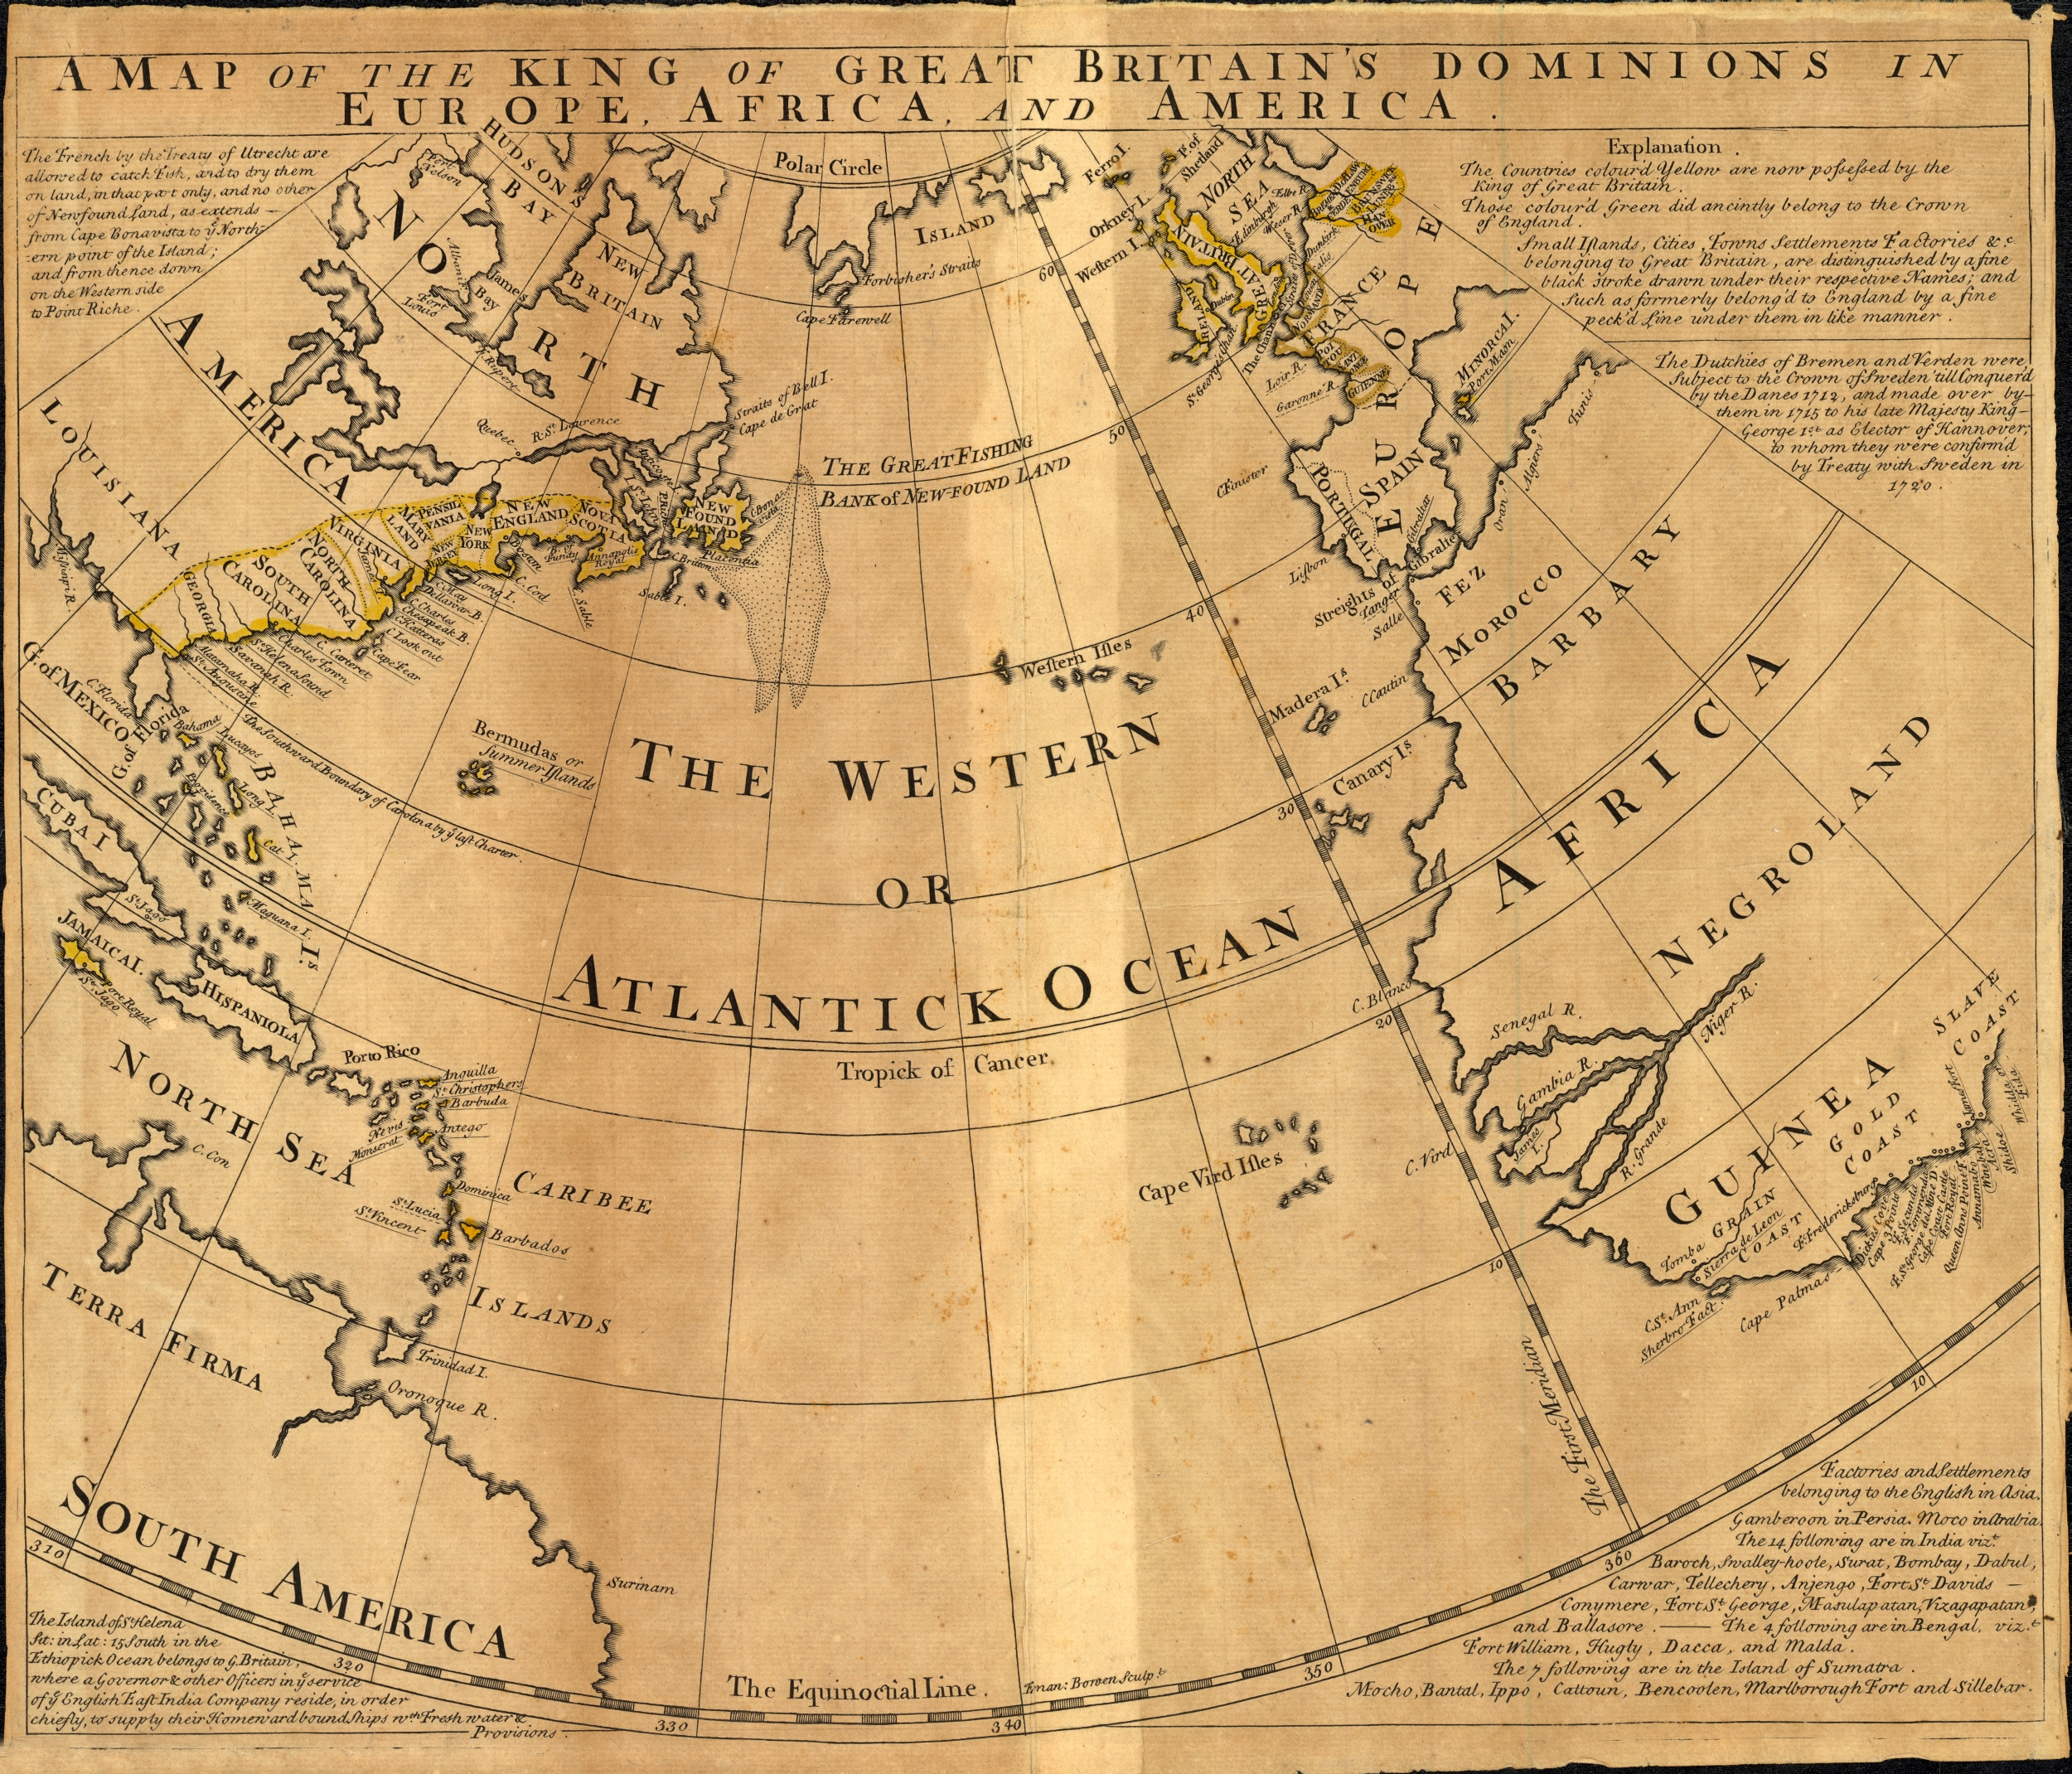 Map of Great Britain's dominions in Europe, Africa, and America, 1759